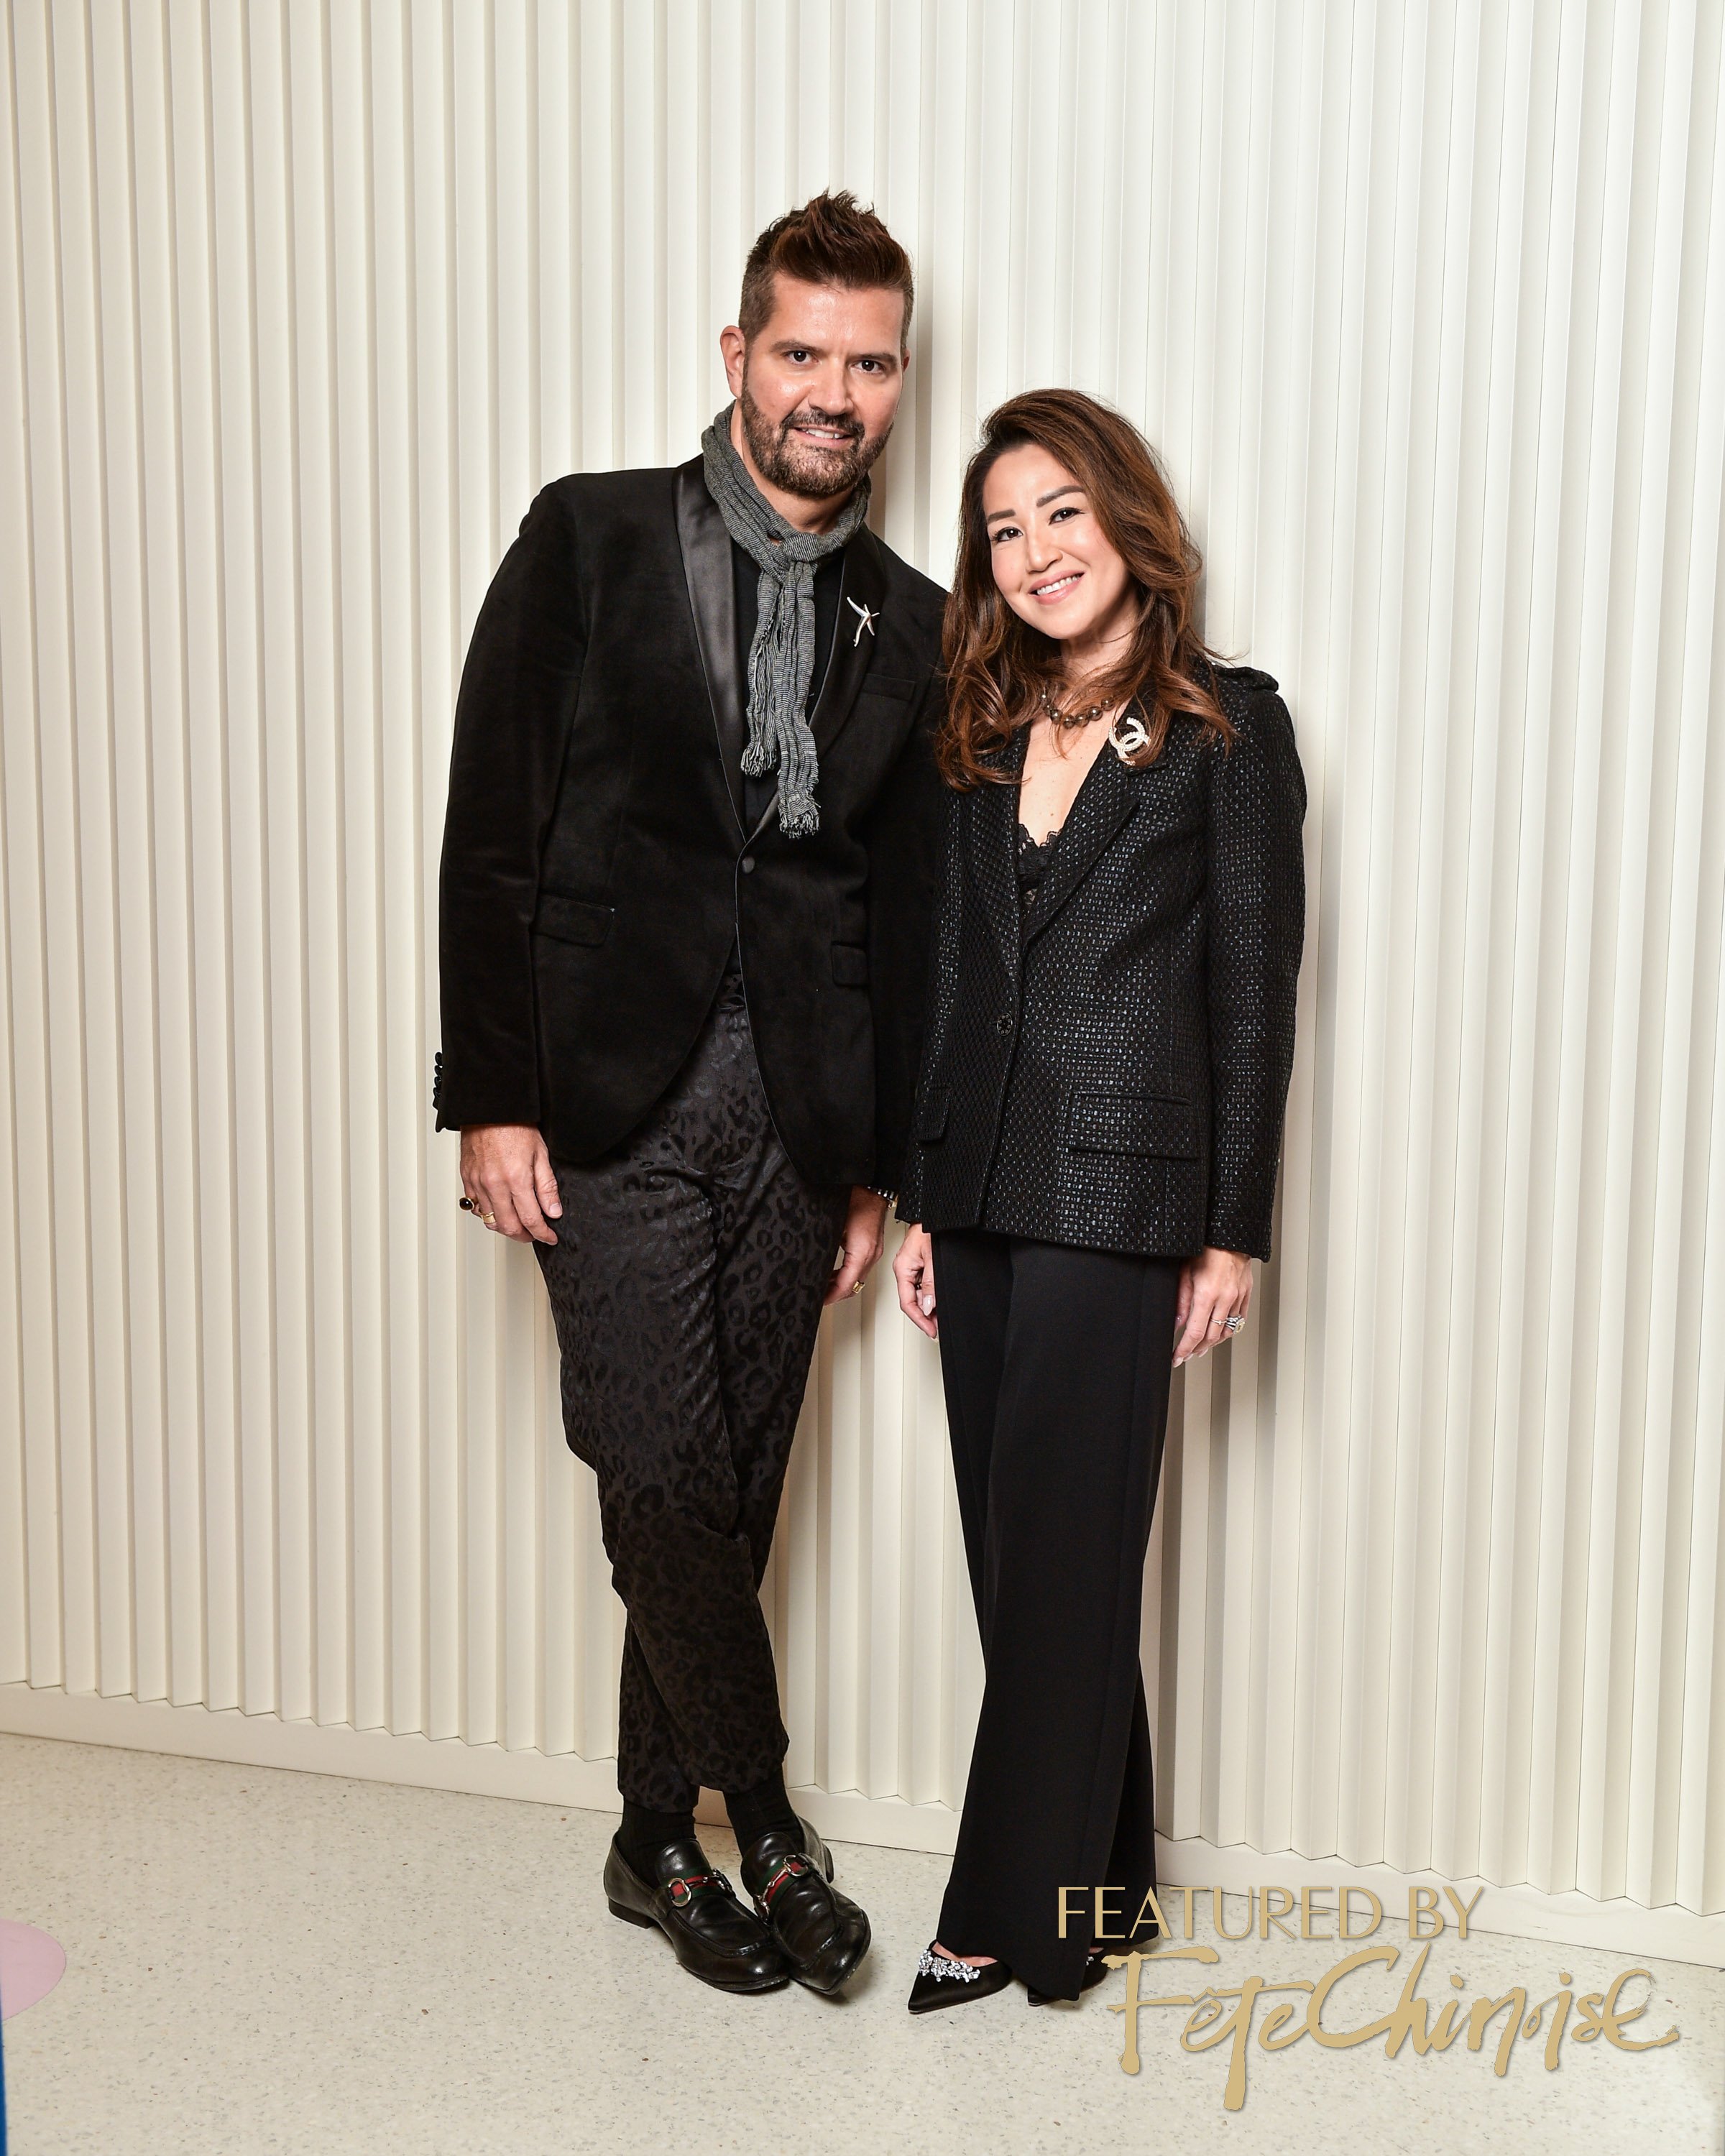 Fete-Chionise-Magaine-edition7-launch-party-holt-renfrew-photography-release-188.jpg